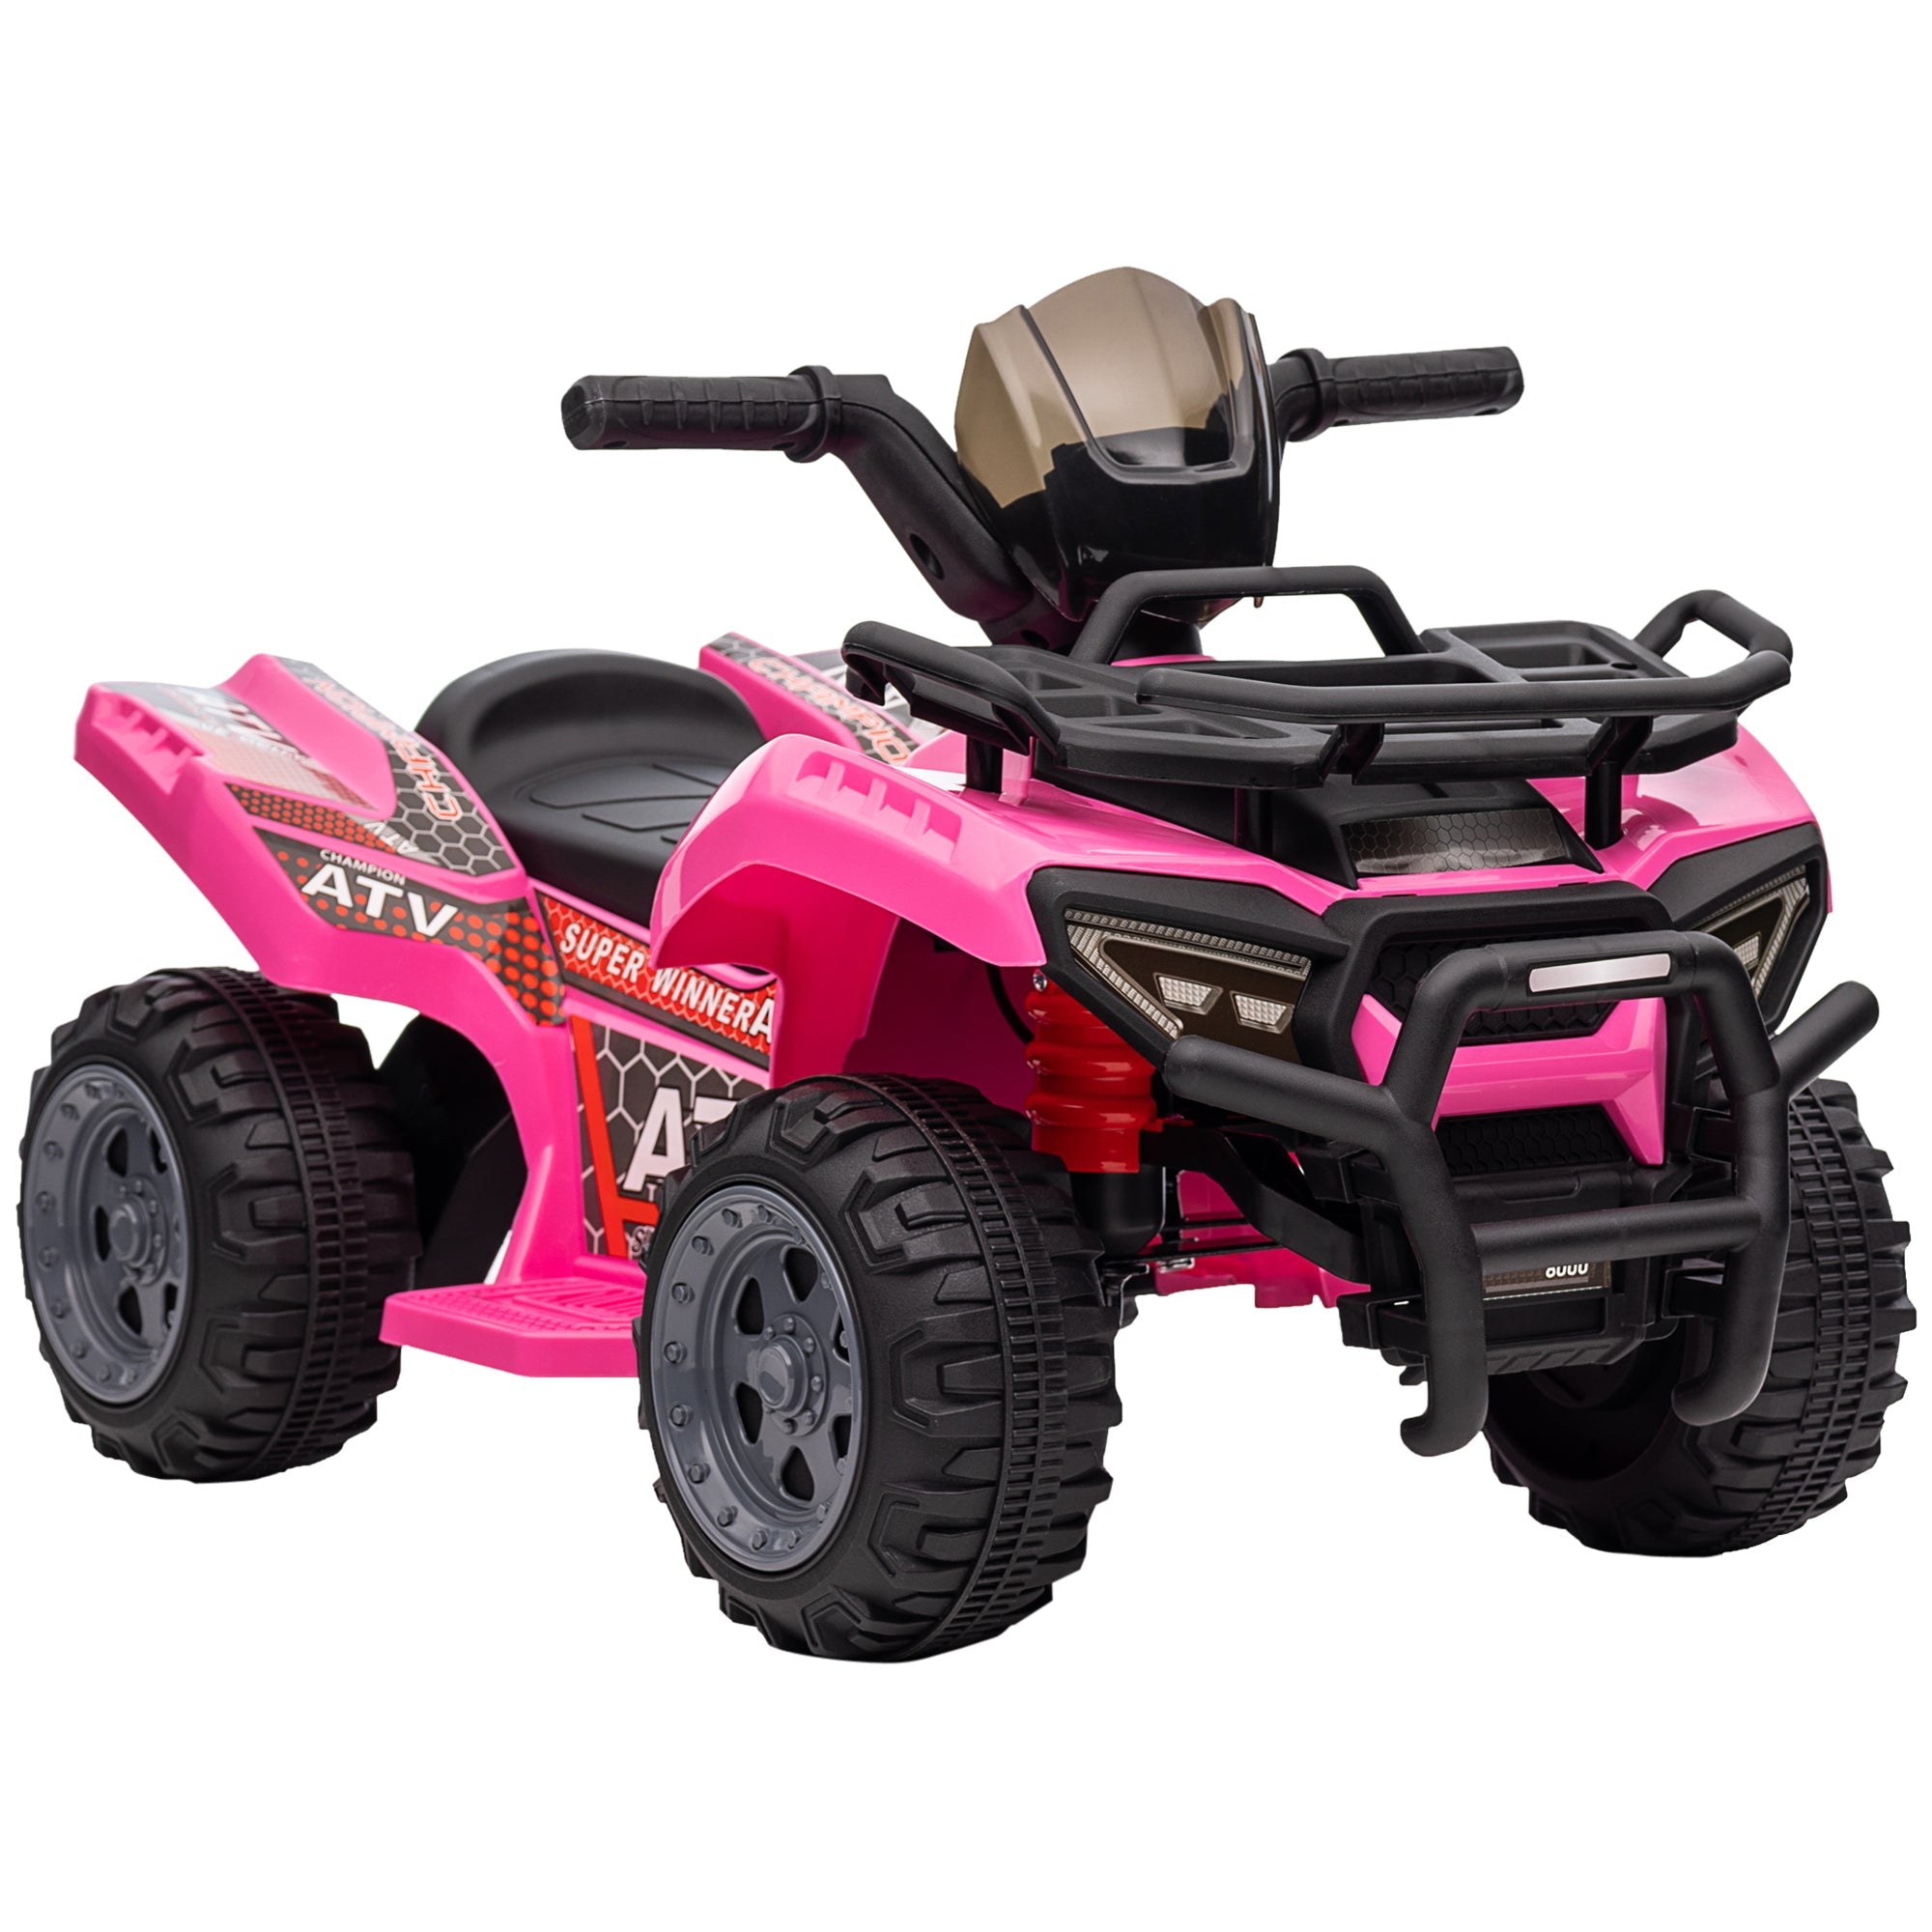 HOMCOM 6V Kids Electric Ride on Toy ATV Quad Bike with Music & Headlights for 18-36 Months (Pink)